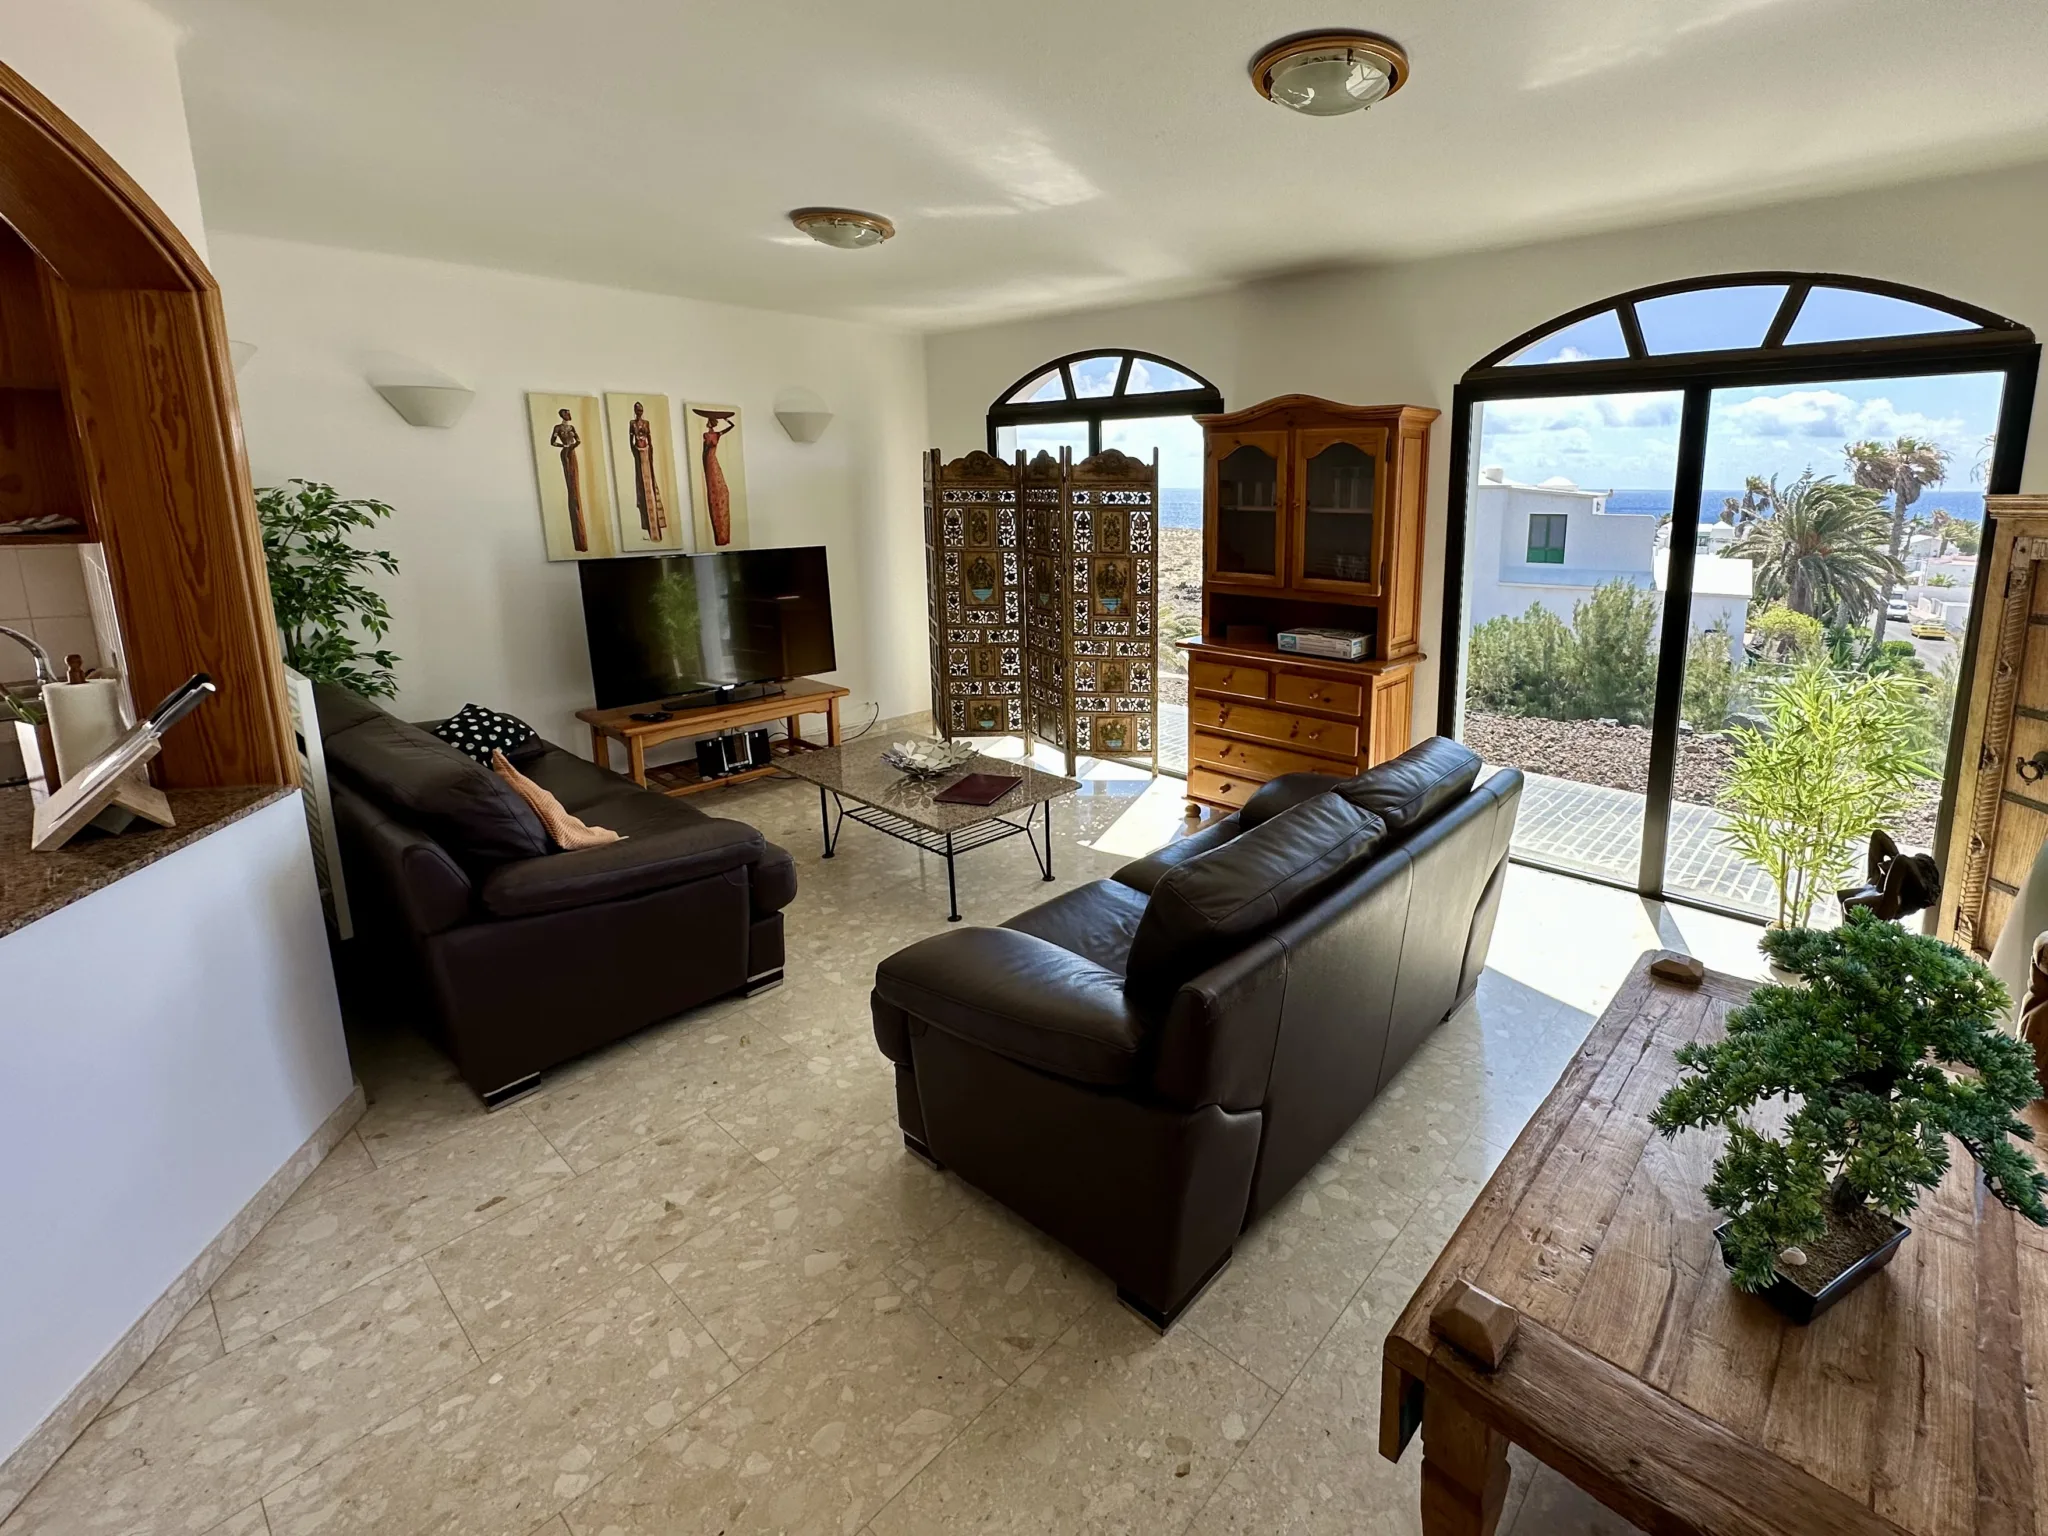 The living room of Casa Rond 1 offers a great view over the garden and the Atlantic Ocean.